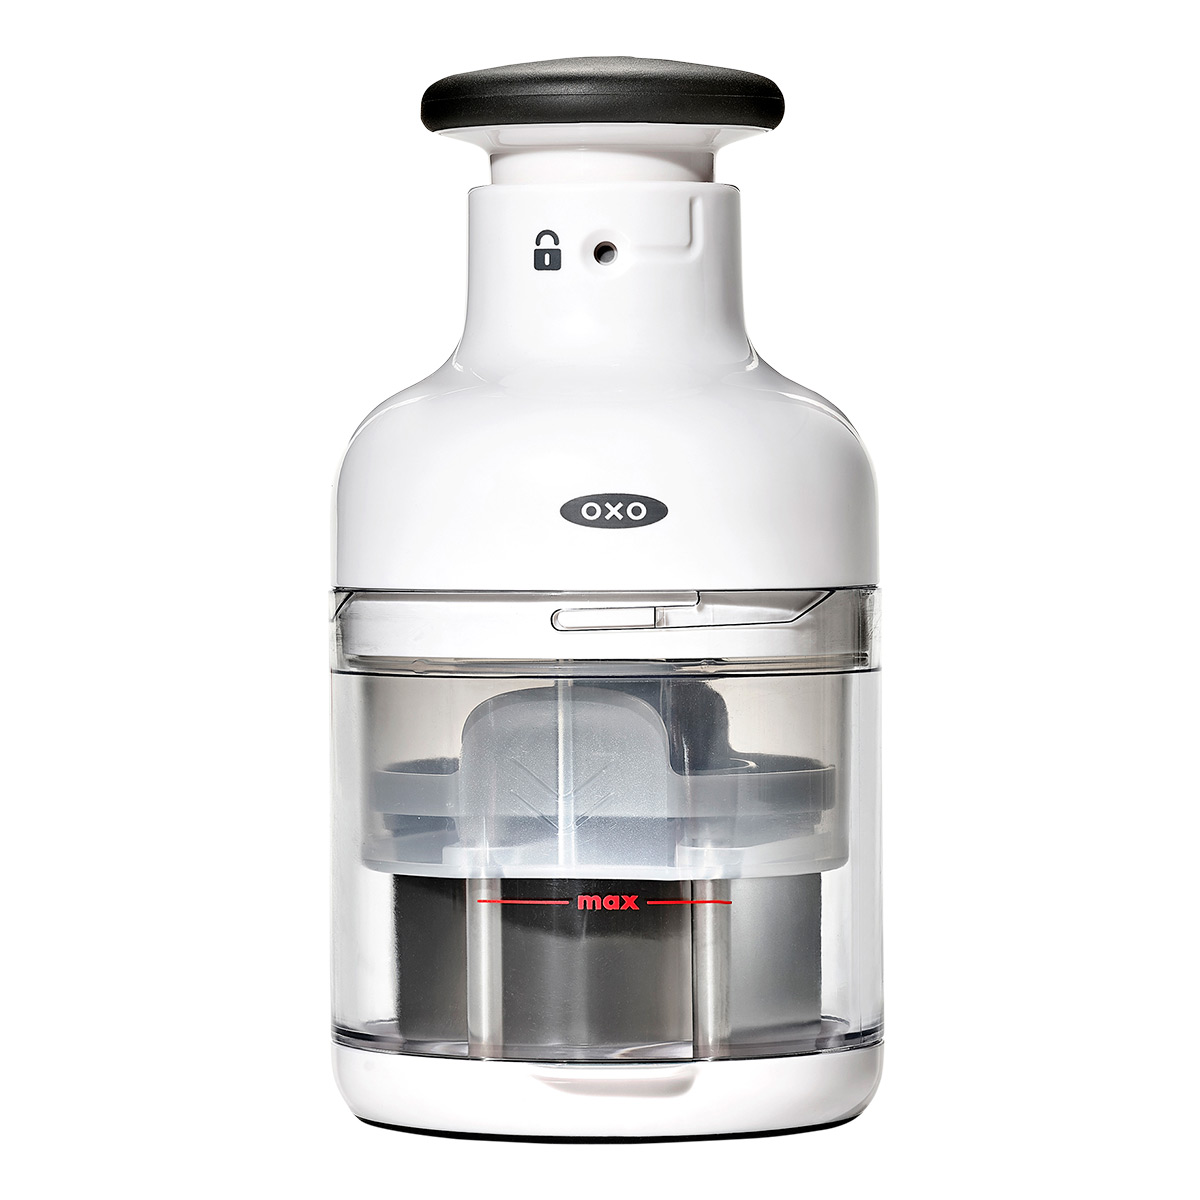 https://www.containerstore.com/catalogimages/477256/10091358-oxo-chopper-ven8.jpg